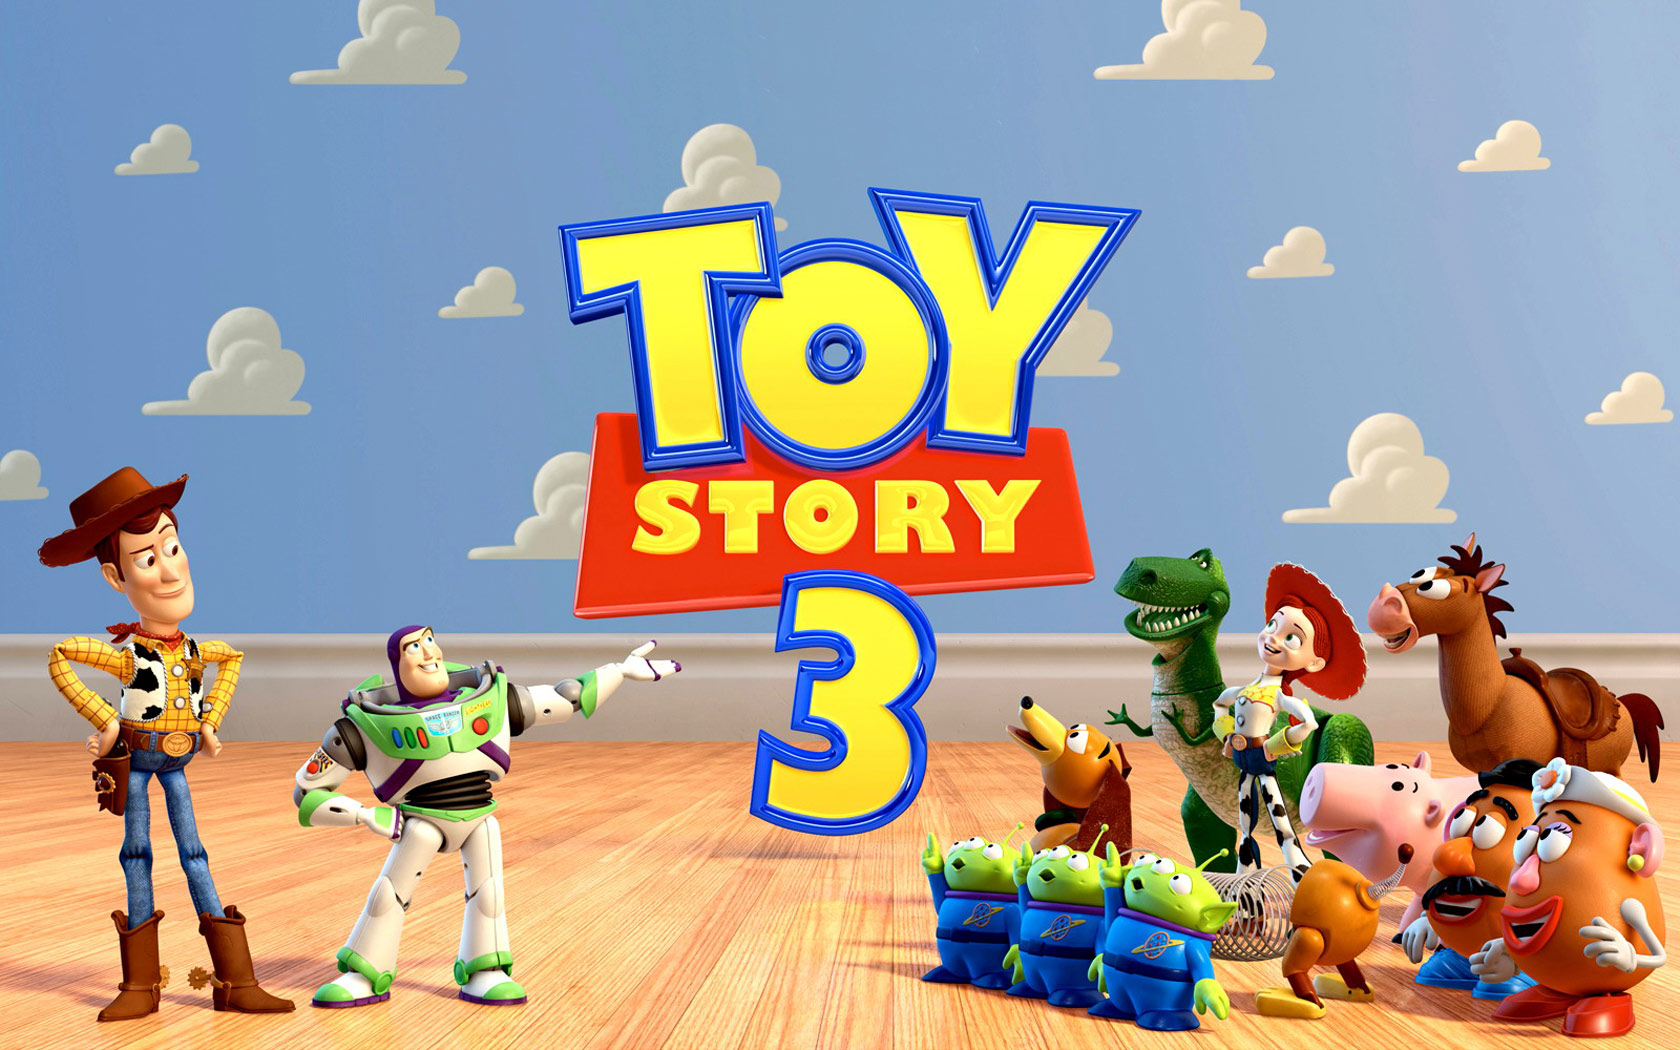 Download this Toy Story Easter Eggs picture